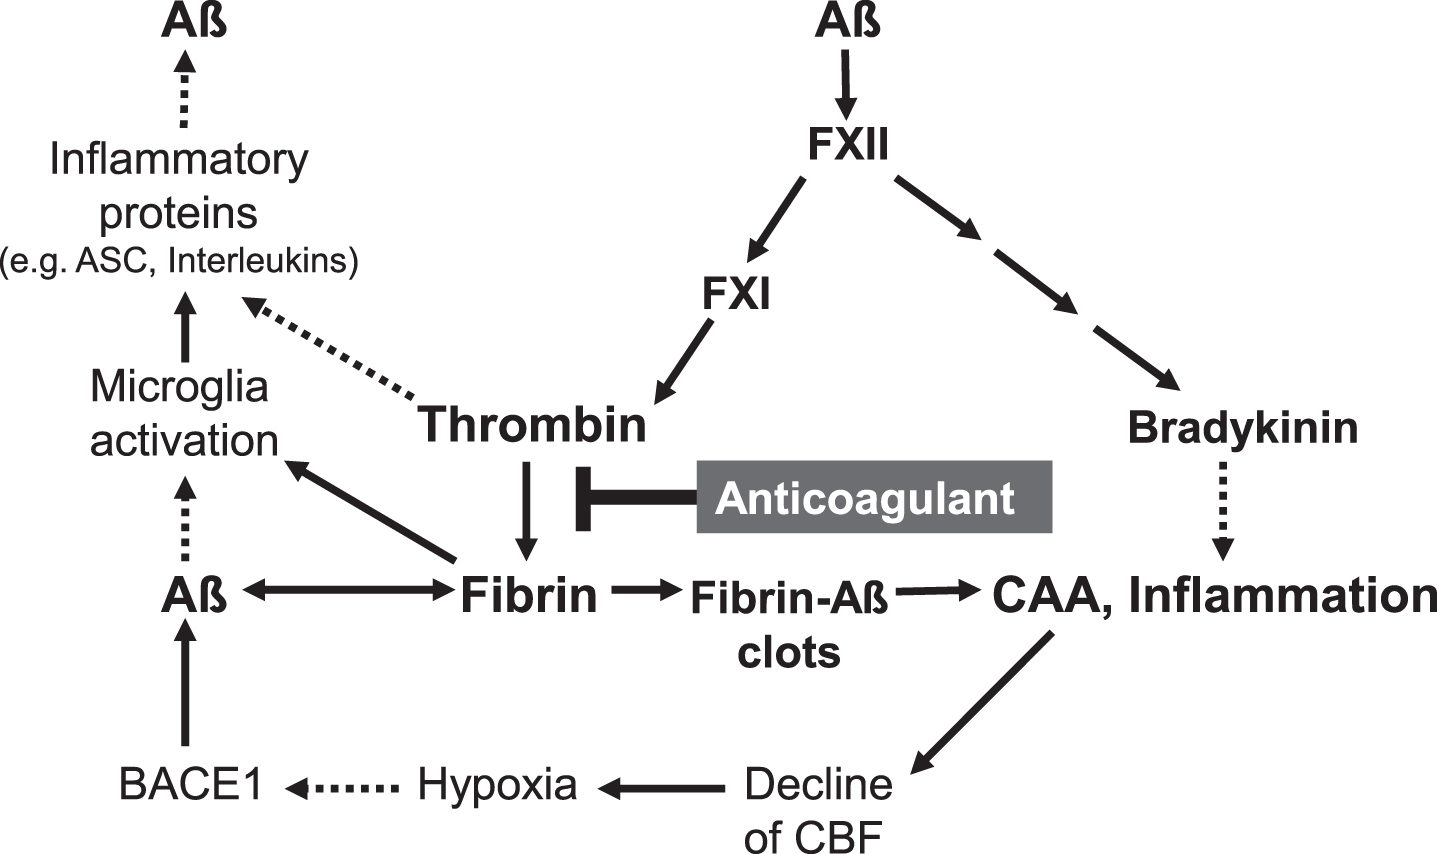 Key factors in cerebral amyloid angiopathy (CAA) and neuroinflammation are amyloid-β-proteins (Aβ), fibrin and thrombin (according to [26, 28, 47, 48, 62, 66]). Aβ binds to fibrin(ogen) and forms degradation-resistant, Aβ-containing fibrin deposits (fibrin-Aβ clots), which are found in brain parenchyma between neuron cells and in cerebral blood vessels in areas of CAA. Aβ also activates the blood coagulation factor XII, leading to enhanced formation of proinflammatory thrombin and bradykinin, and microglia-activating fibrin. Aβ also triggers microglia activation. Activated microglia cells release, e.g., inflammatory interleukins and ASC (apoptosis-associated speck-like protein containing a CARD) protein complexes, which stimulate production and spread of cerebral Aβ and ultimately, amplify fibrin-Aβ deposition. CAA-induced decline of cerebral blood flow (CBF) and brain perfusion leads to tissue shortage of nutrients and oxygen (hypoxia), which stimulates β-secretase1 (BACE1) expression for amplified Aβ formation. Anticoagulant treatment intervenes in a central point of this catastrophic cascade. The drug inhibits thrombin and thus, the formation of fibrin. Progressive fibrin-Aβ clot deposition in CAA and brain parenchyma, thrombin- and fibrin-mediated inflammation and amplified Aβ production and derived neurodegenerative processes, contributing to AD, could be reduced by anticoagulant treatment. Indirect stimulatory effects are represented by dotted lines.